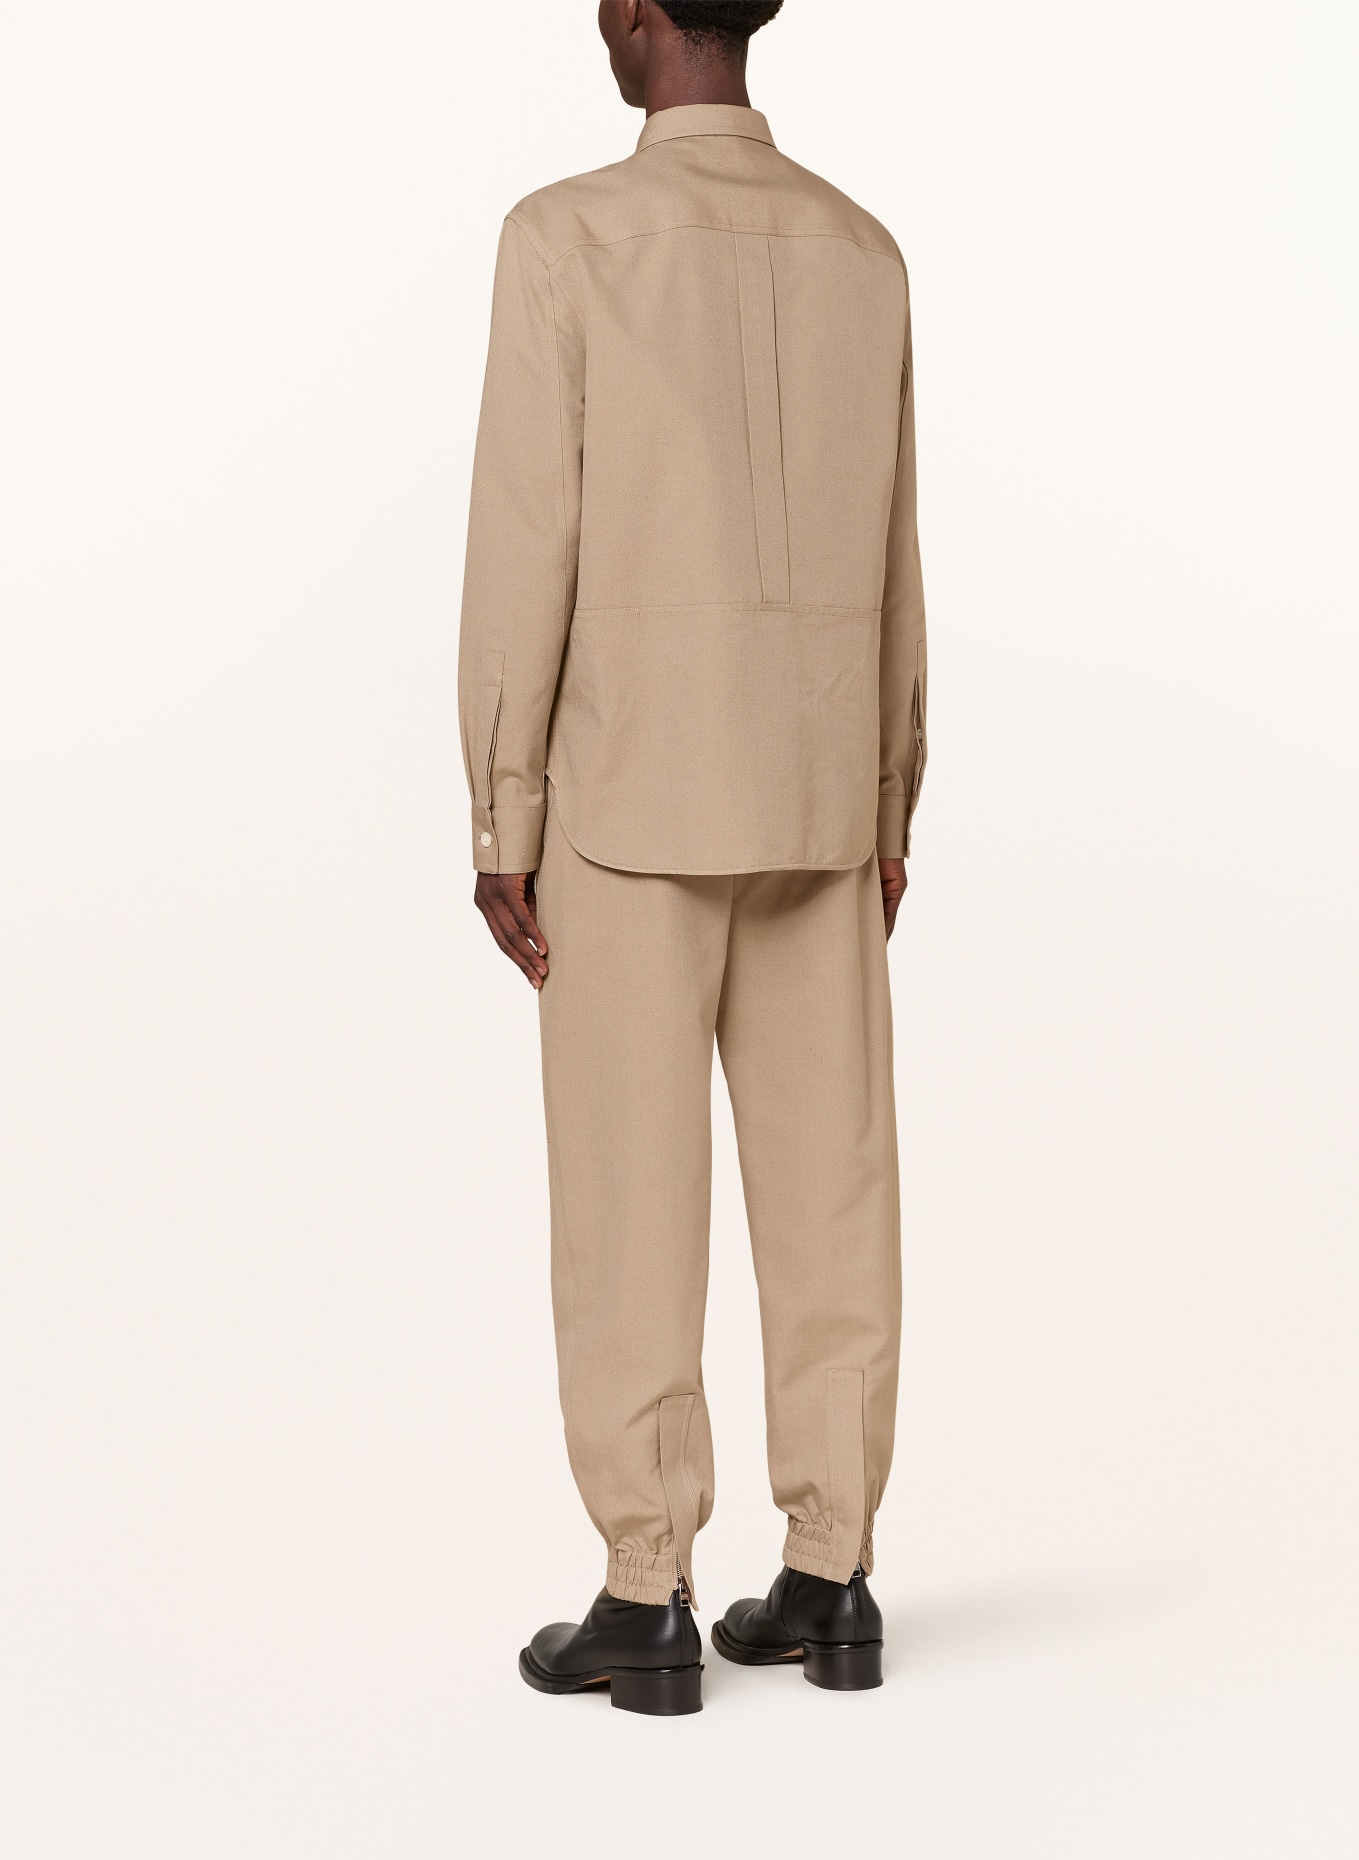 Alexander McQUEEN Pants in jogger style extra slim fit, Color: BEIGE (Image 3)